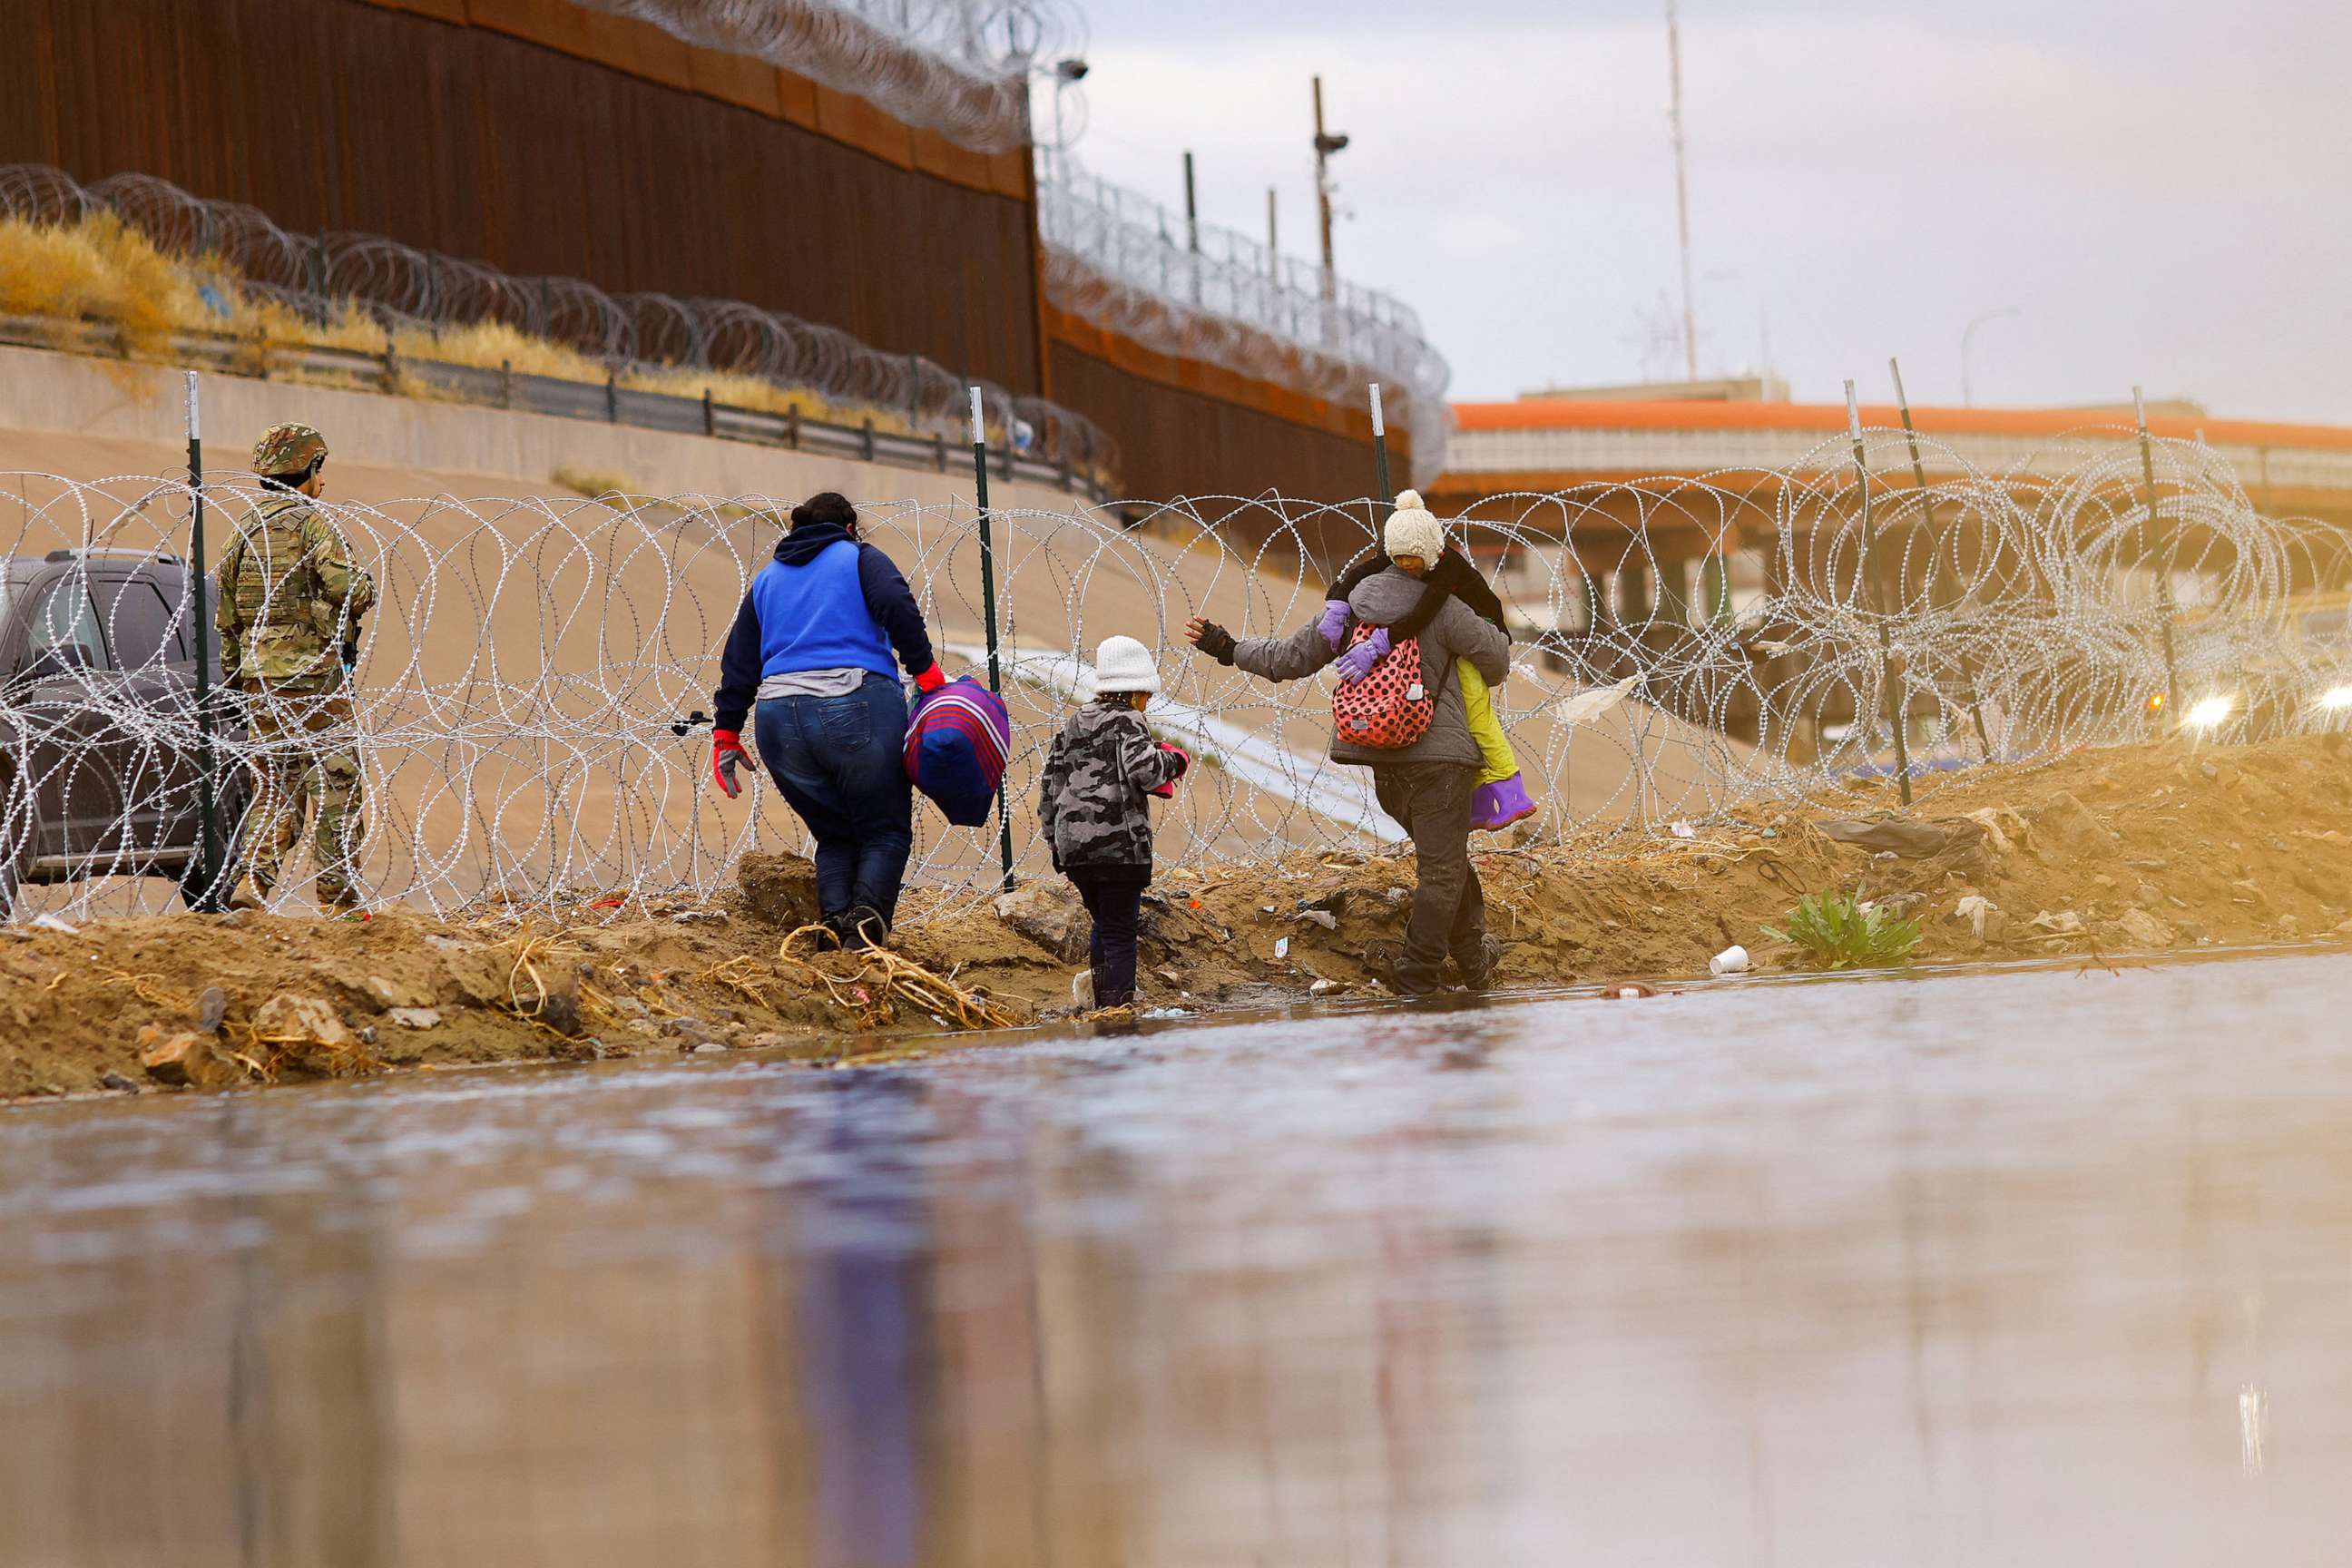 PHOTO: In this Jan. 17, 2023, file photo, asylum-seeking migrants walk past a razor wire fence as members of the Texas National Guard stand guard on the banks of the Rio Bravo river, as seen from Ciudad Juarez, Mexico.